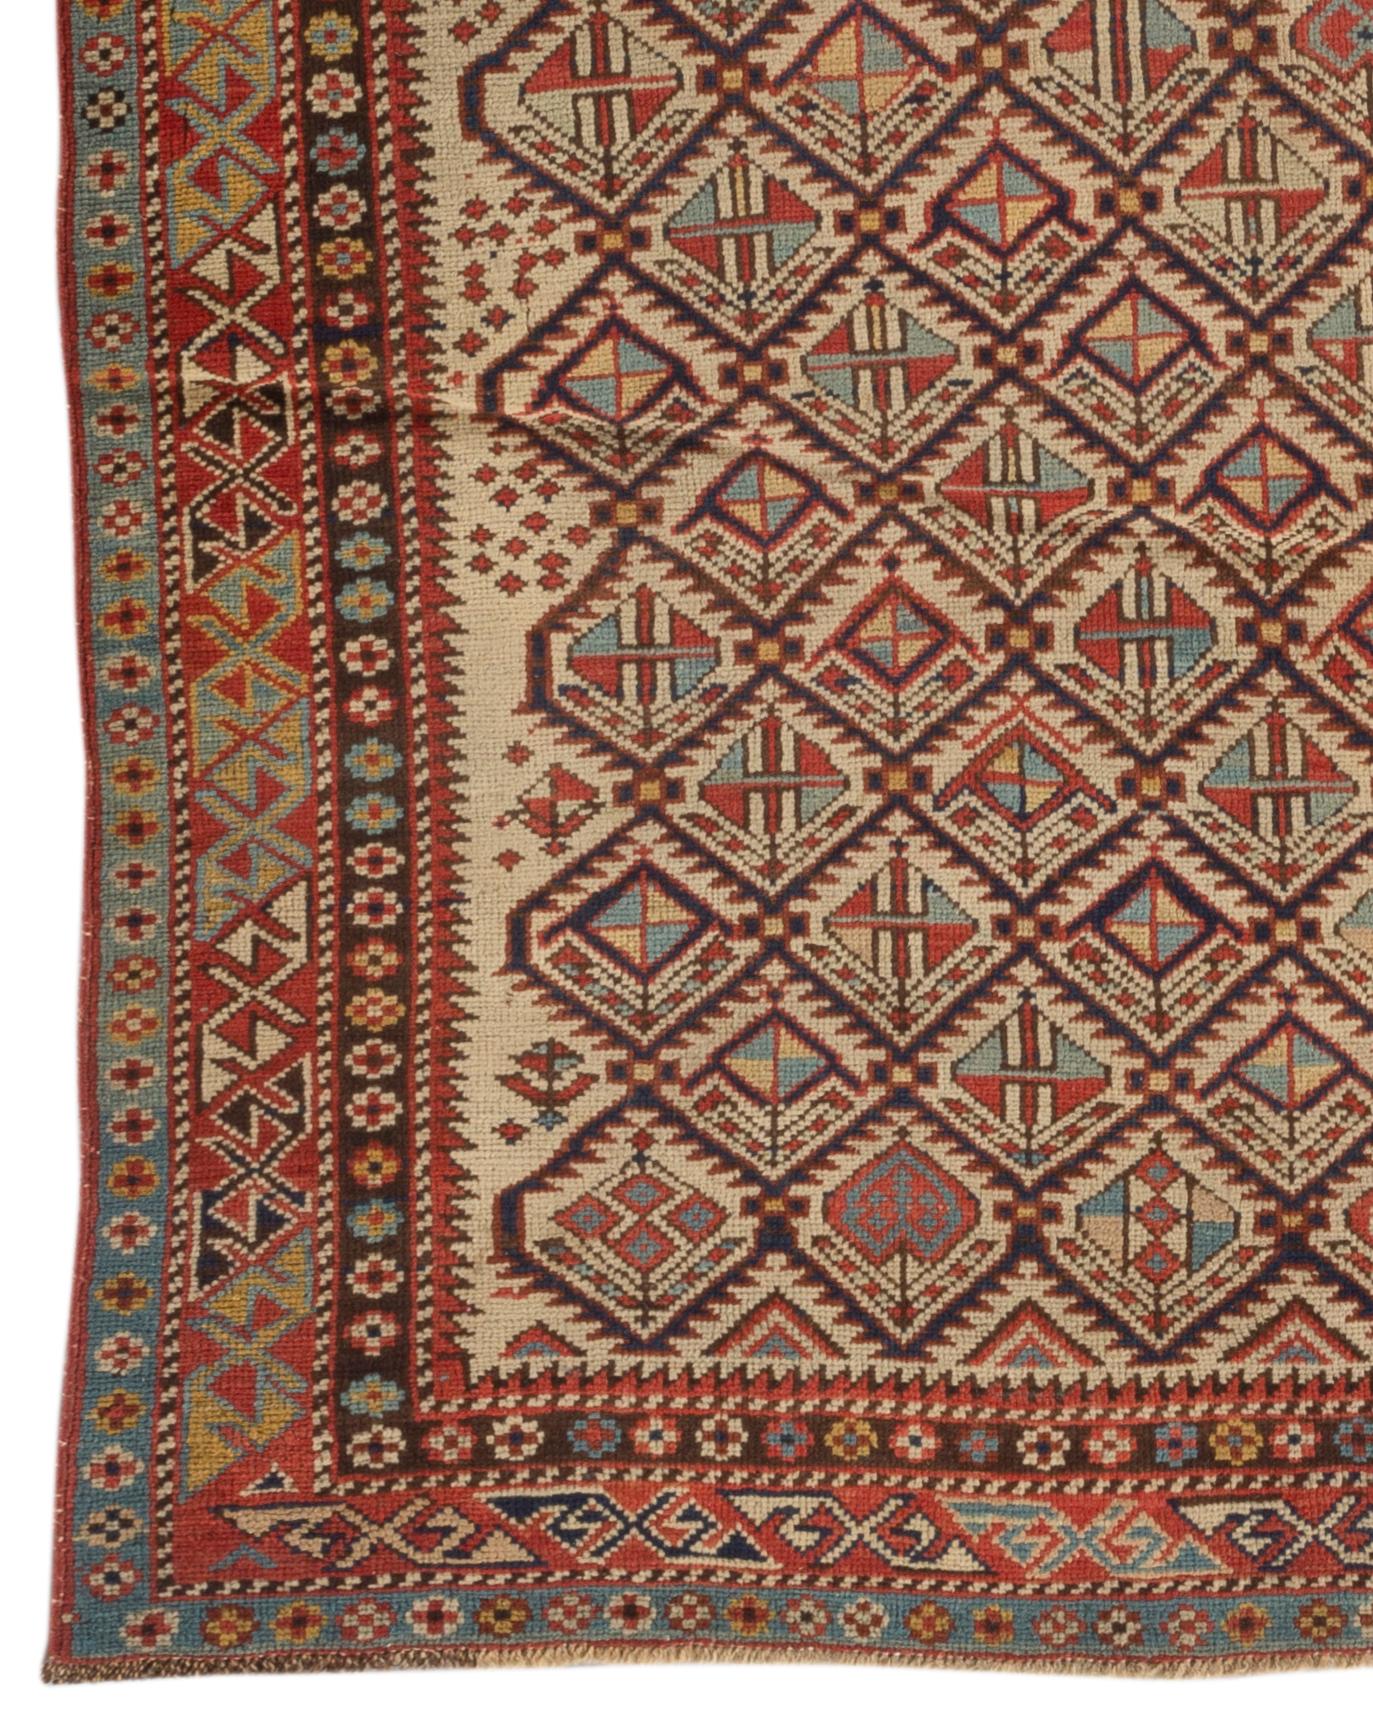 Antique Caucasian Dagestan rug, circa 1880. A mihrab design on an ivory field filled with wonderful ethnic designs and surrounded by the traditional Caucasian multiple borders. Dagestan is located inside Russia in the north of Caucasia, up until the